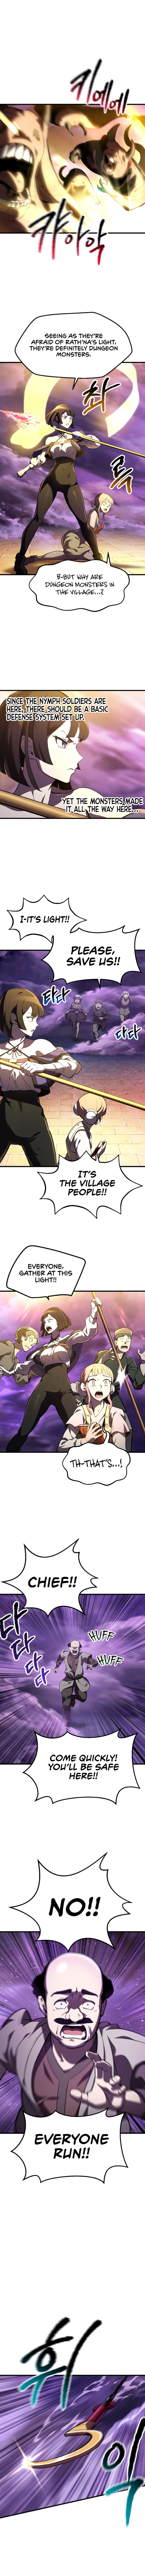 Survival Story of a Sword King in a Fantasy World - Chapter 152 Page 3